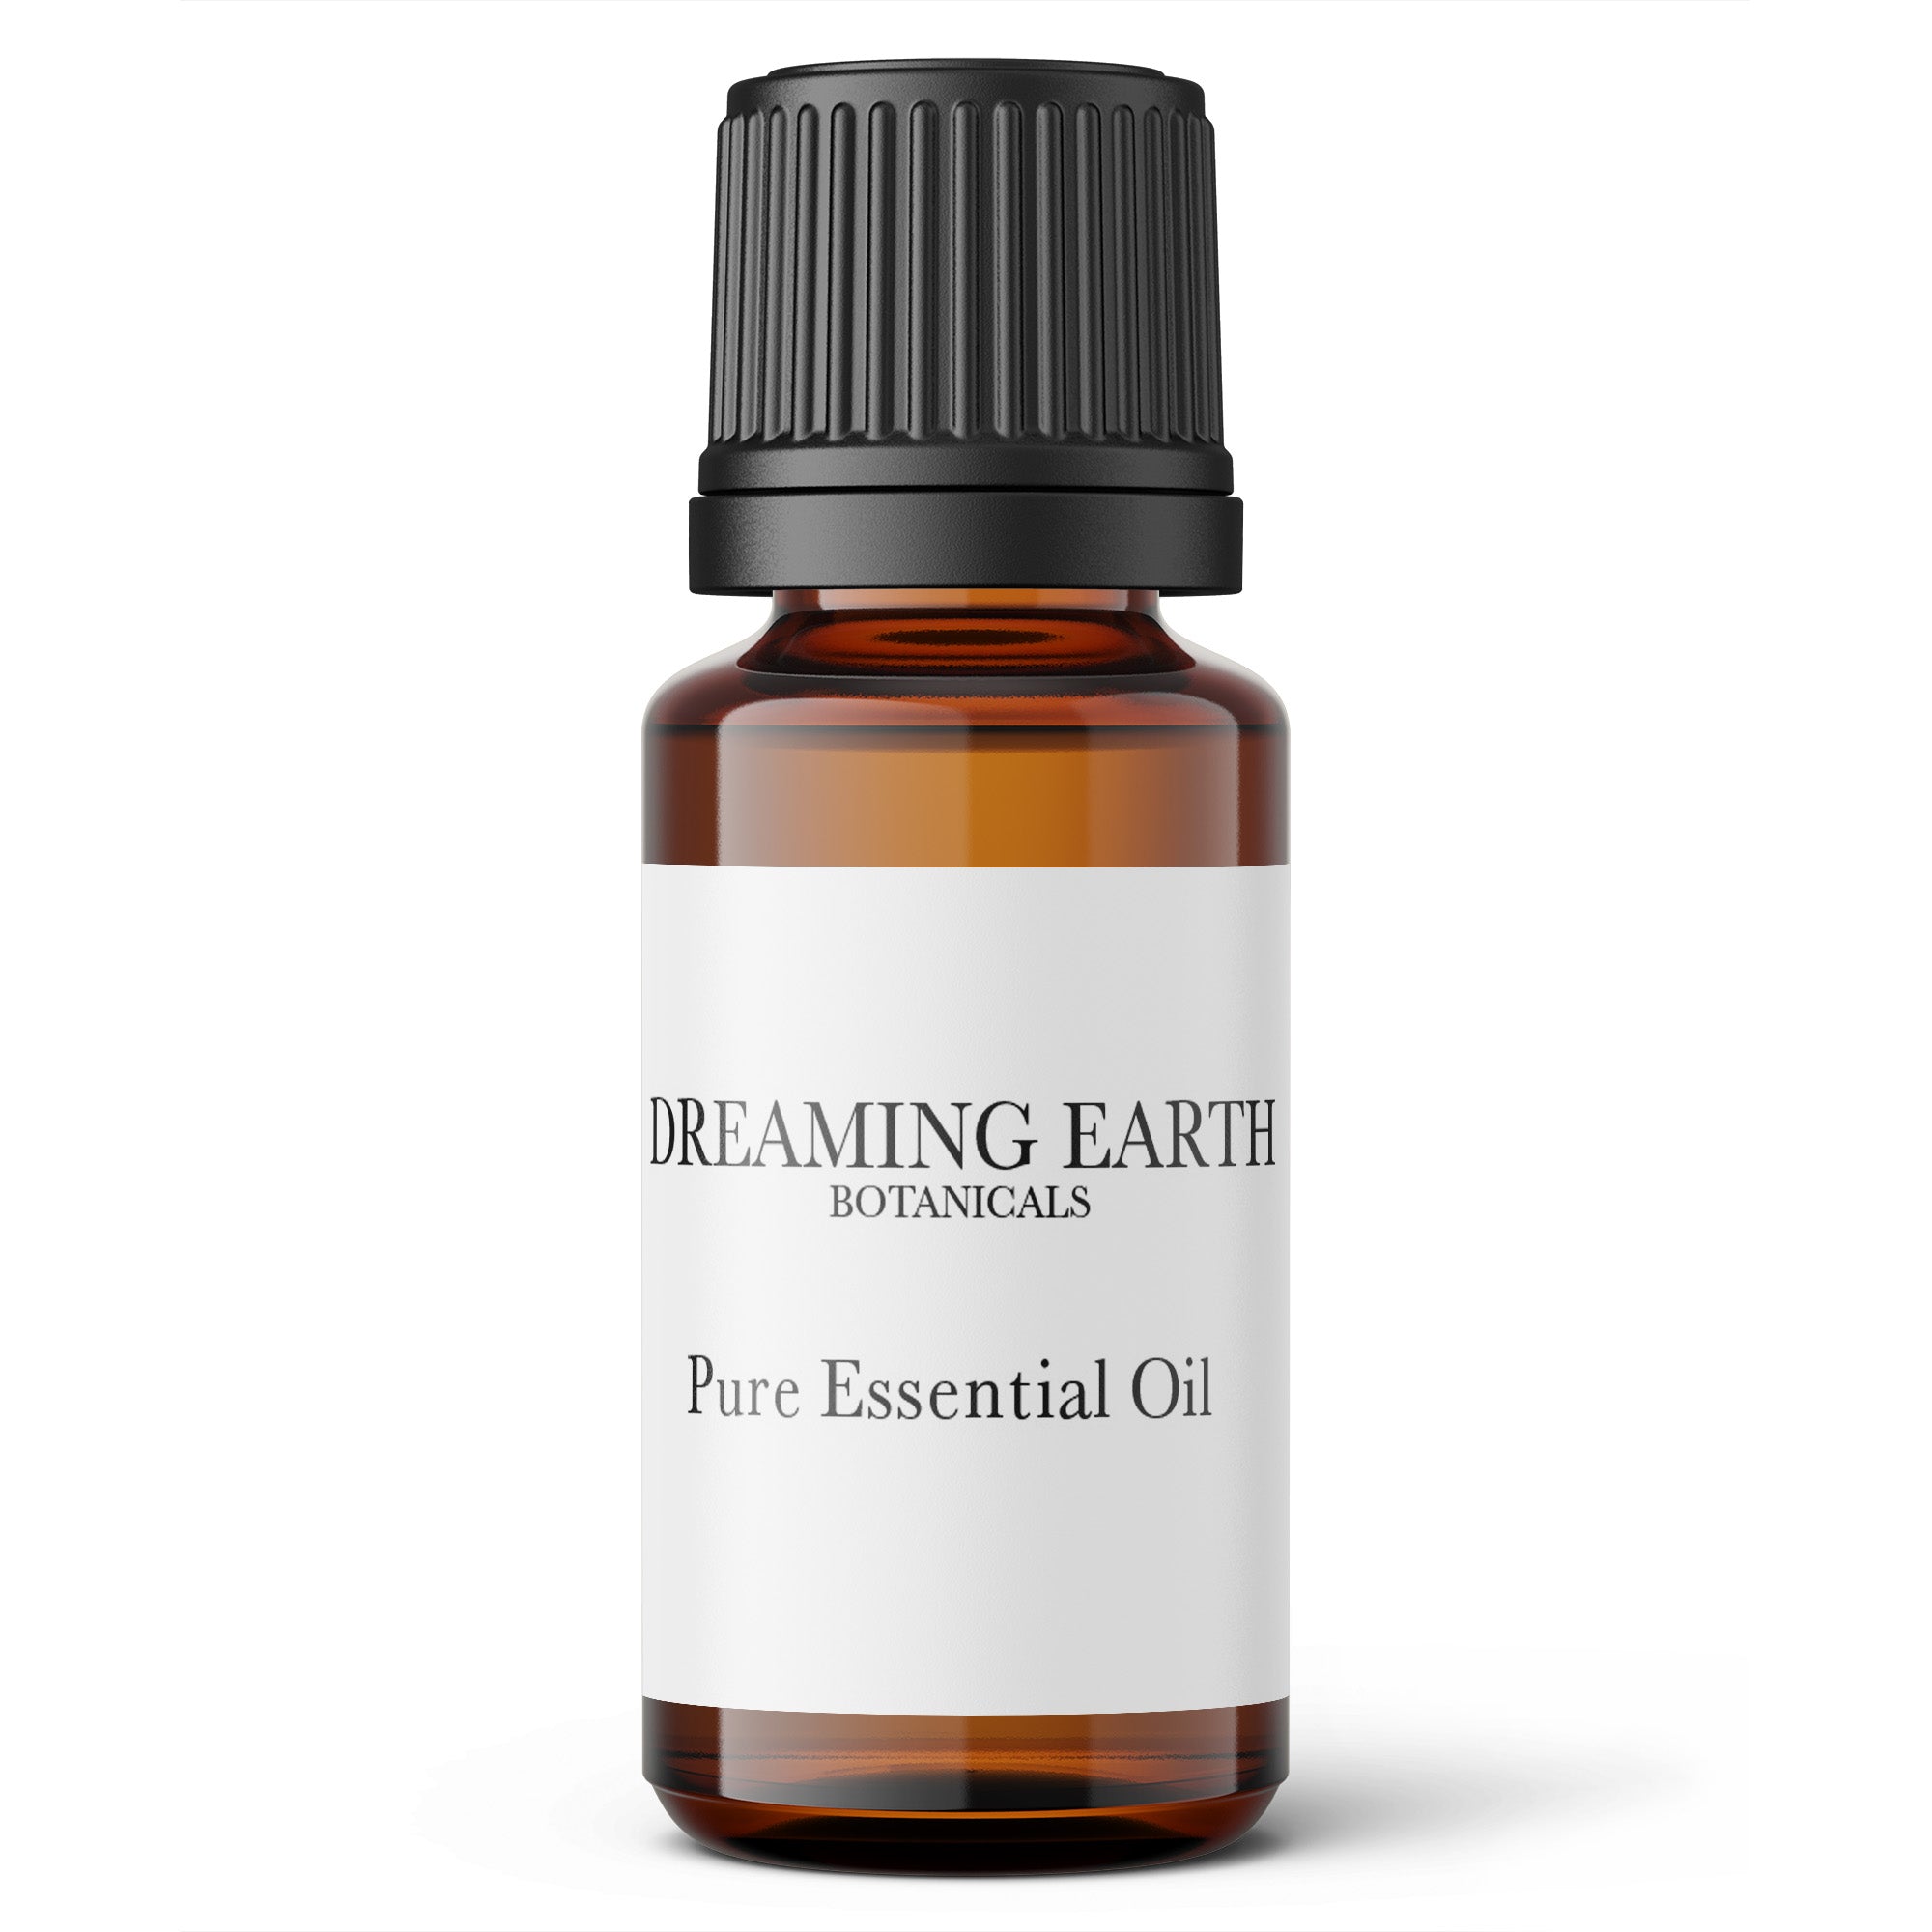 Load image into Gallery viewer, Niaouli Essential Oil - Dreaming Earth Inc
